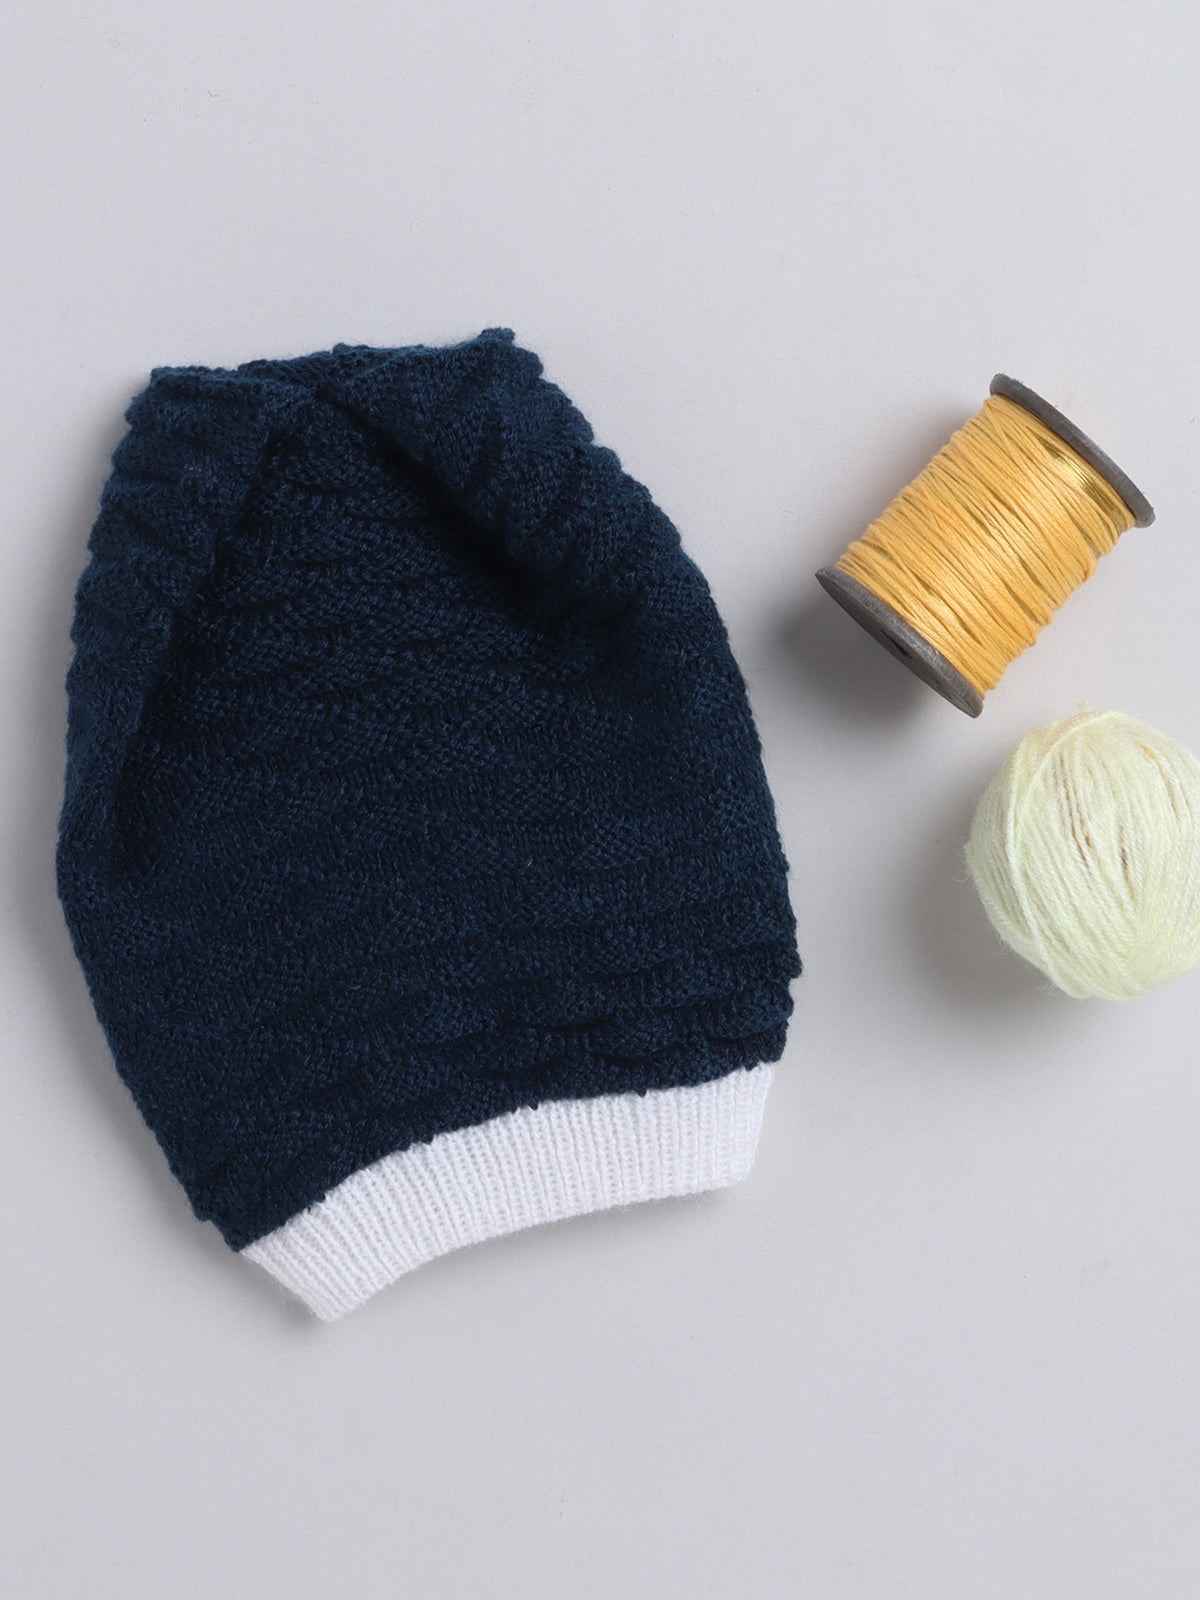 Elegant knitted Textured Round Cap with, Navy Color